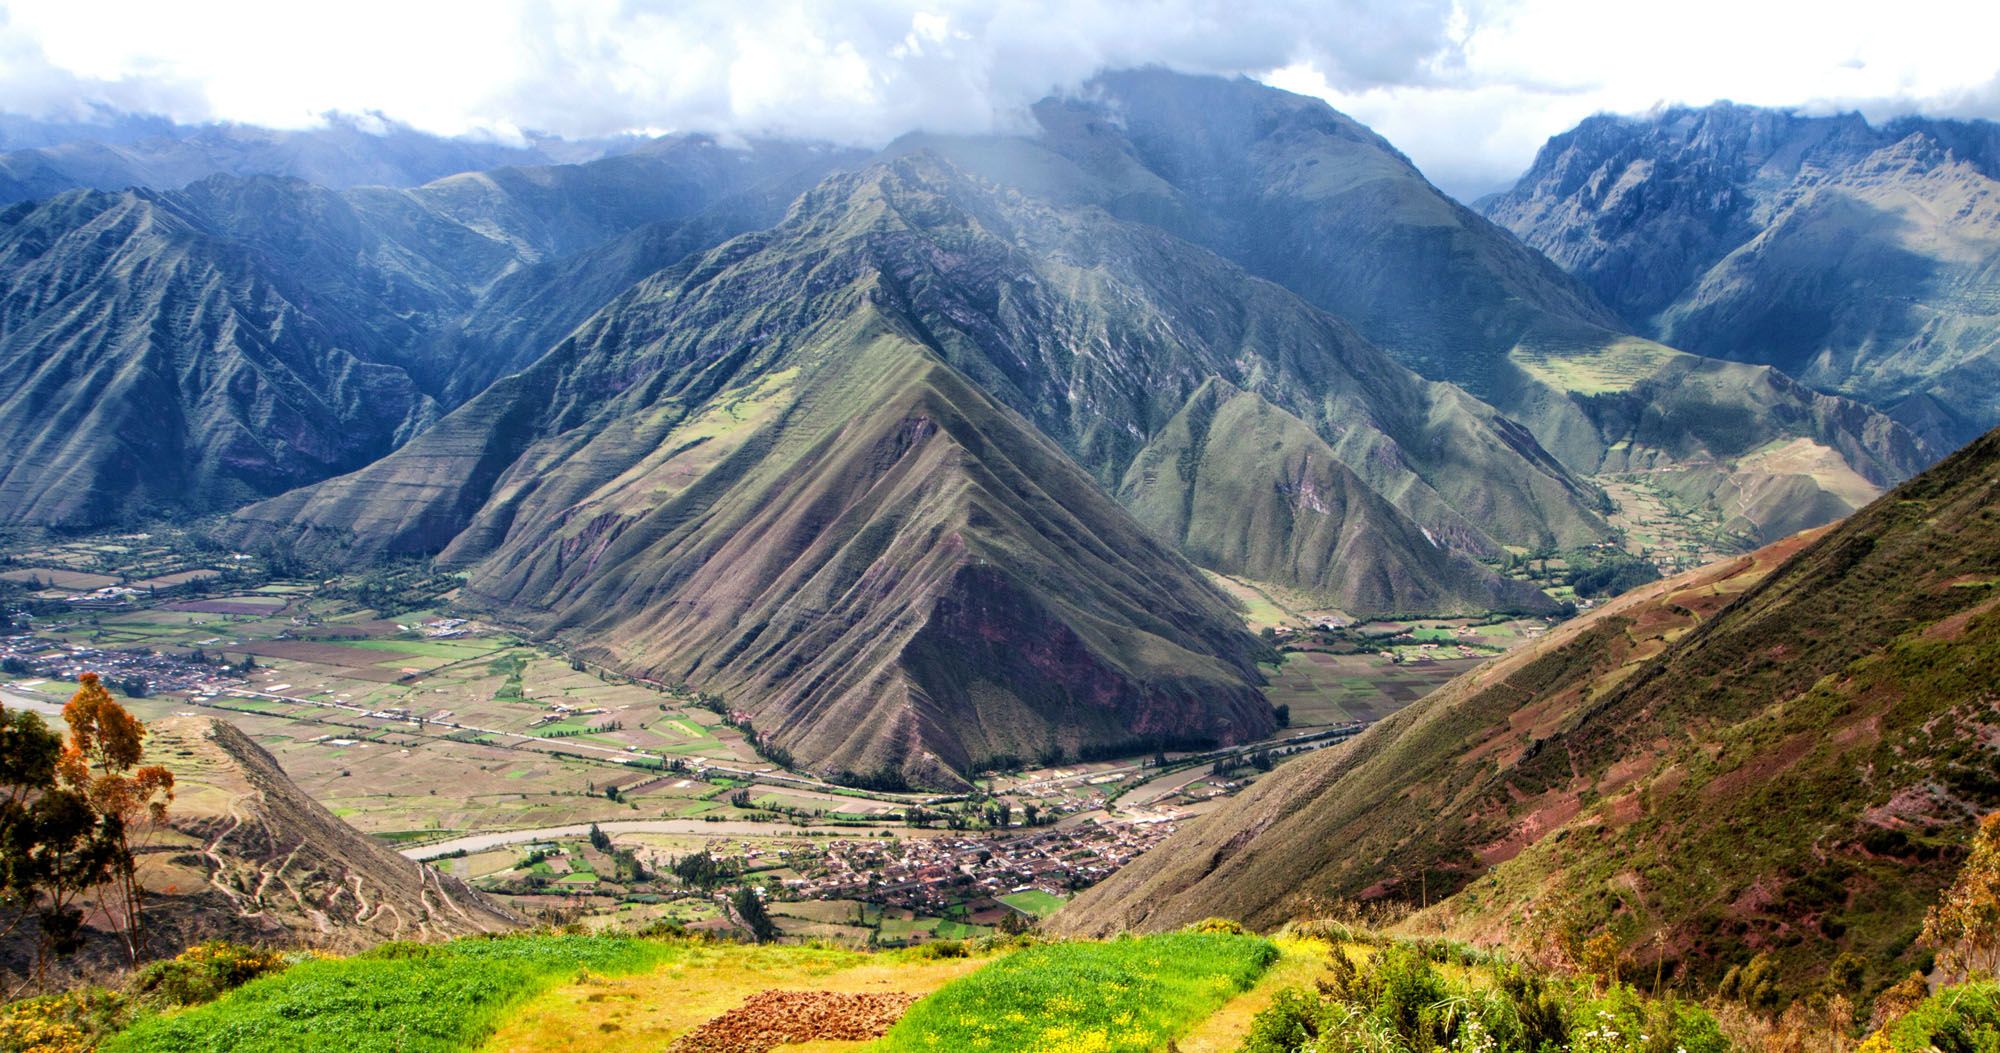 Featured image for “The Sacred Valley of Peru in Pictures”